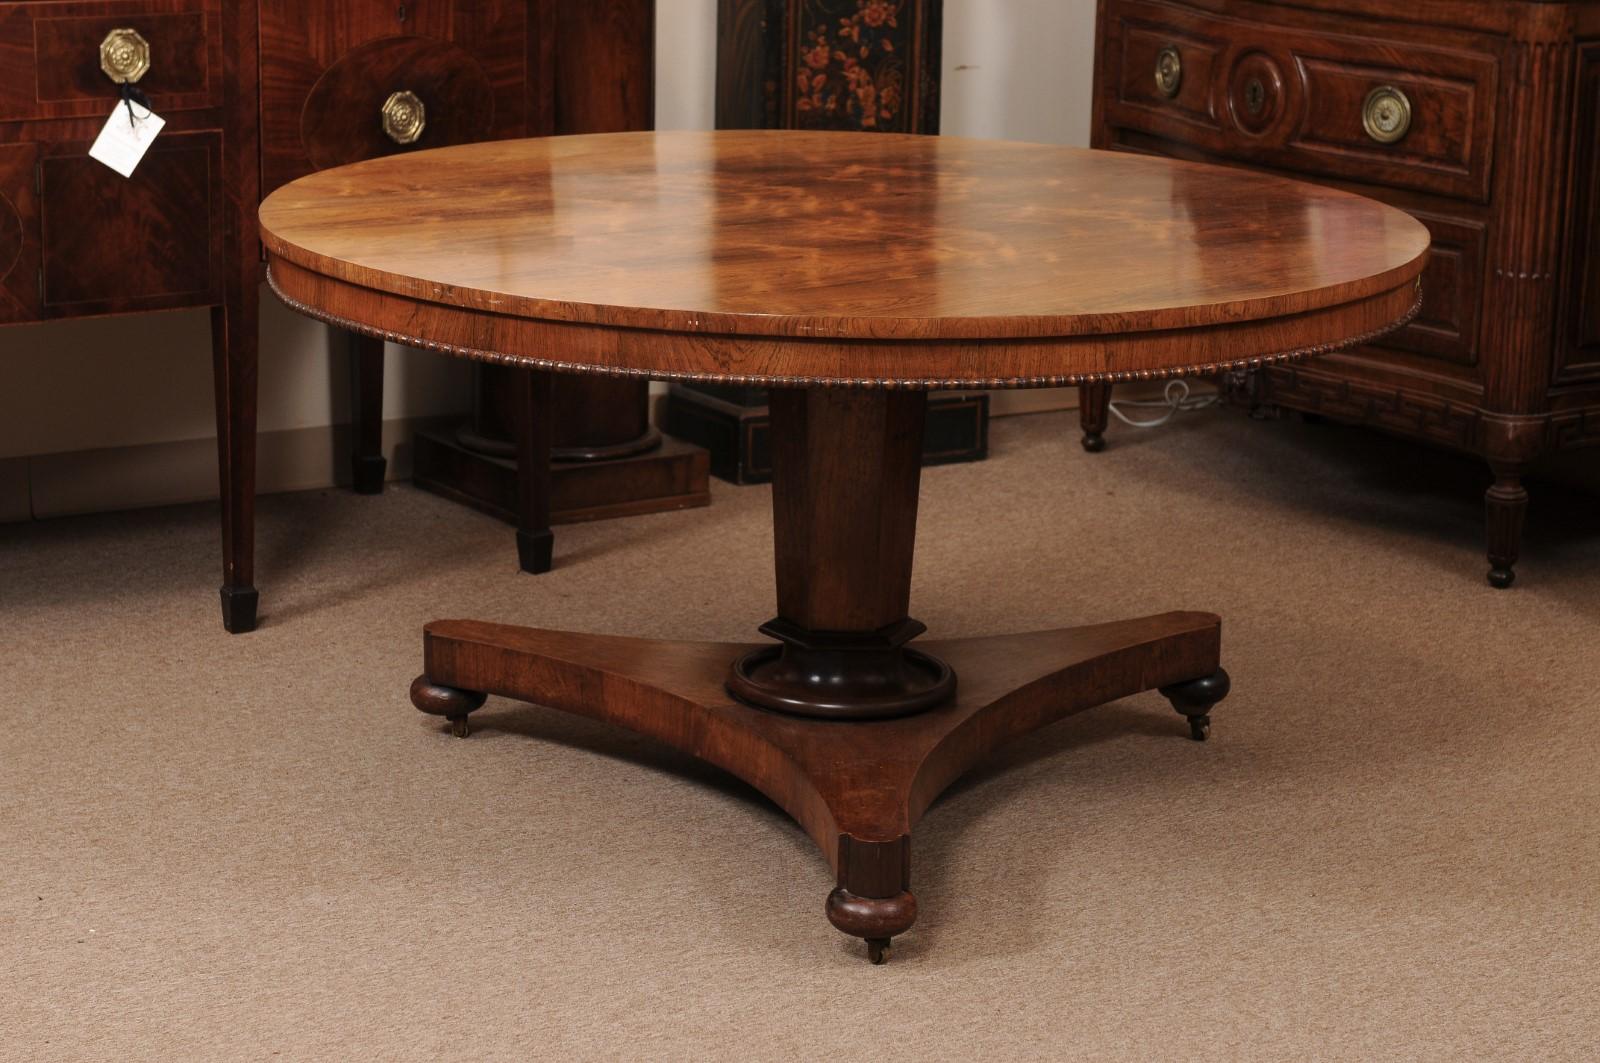 English 19th Century Rosewood Center Table with Beaded Egde and Pedestal Base and Bun feet